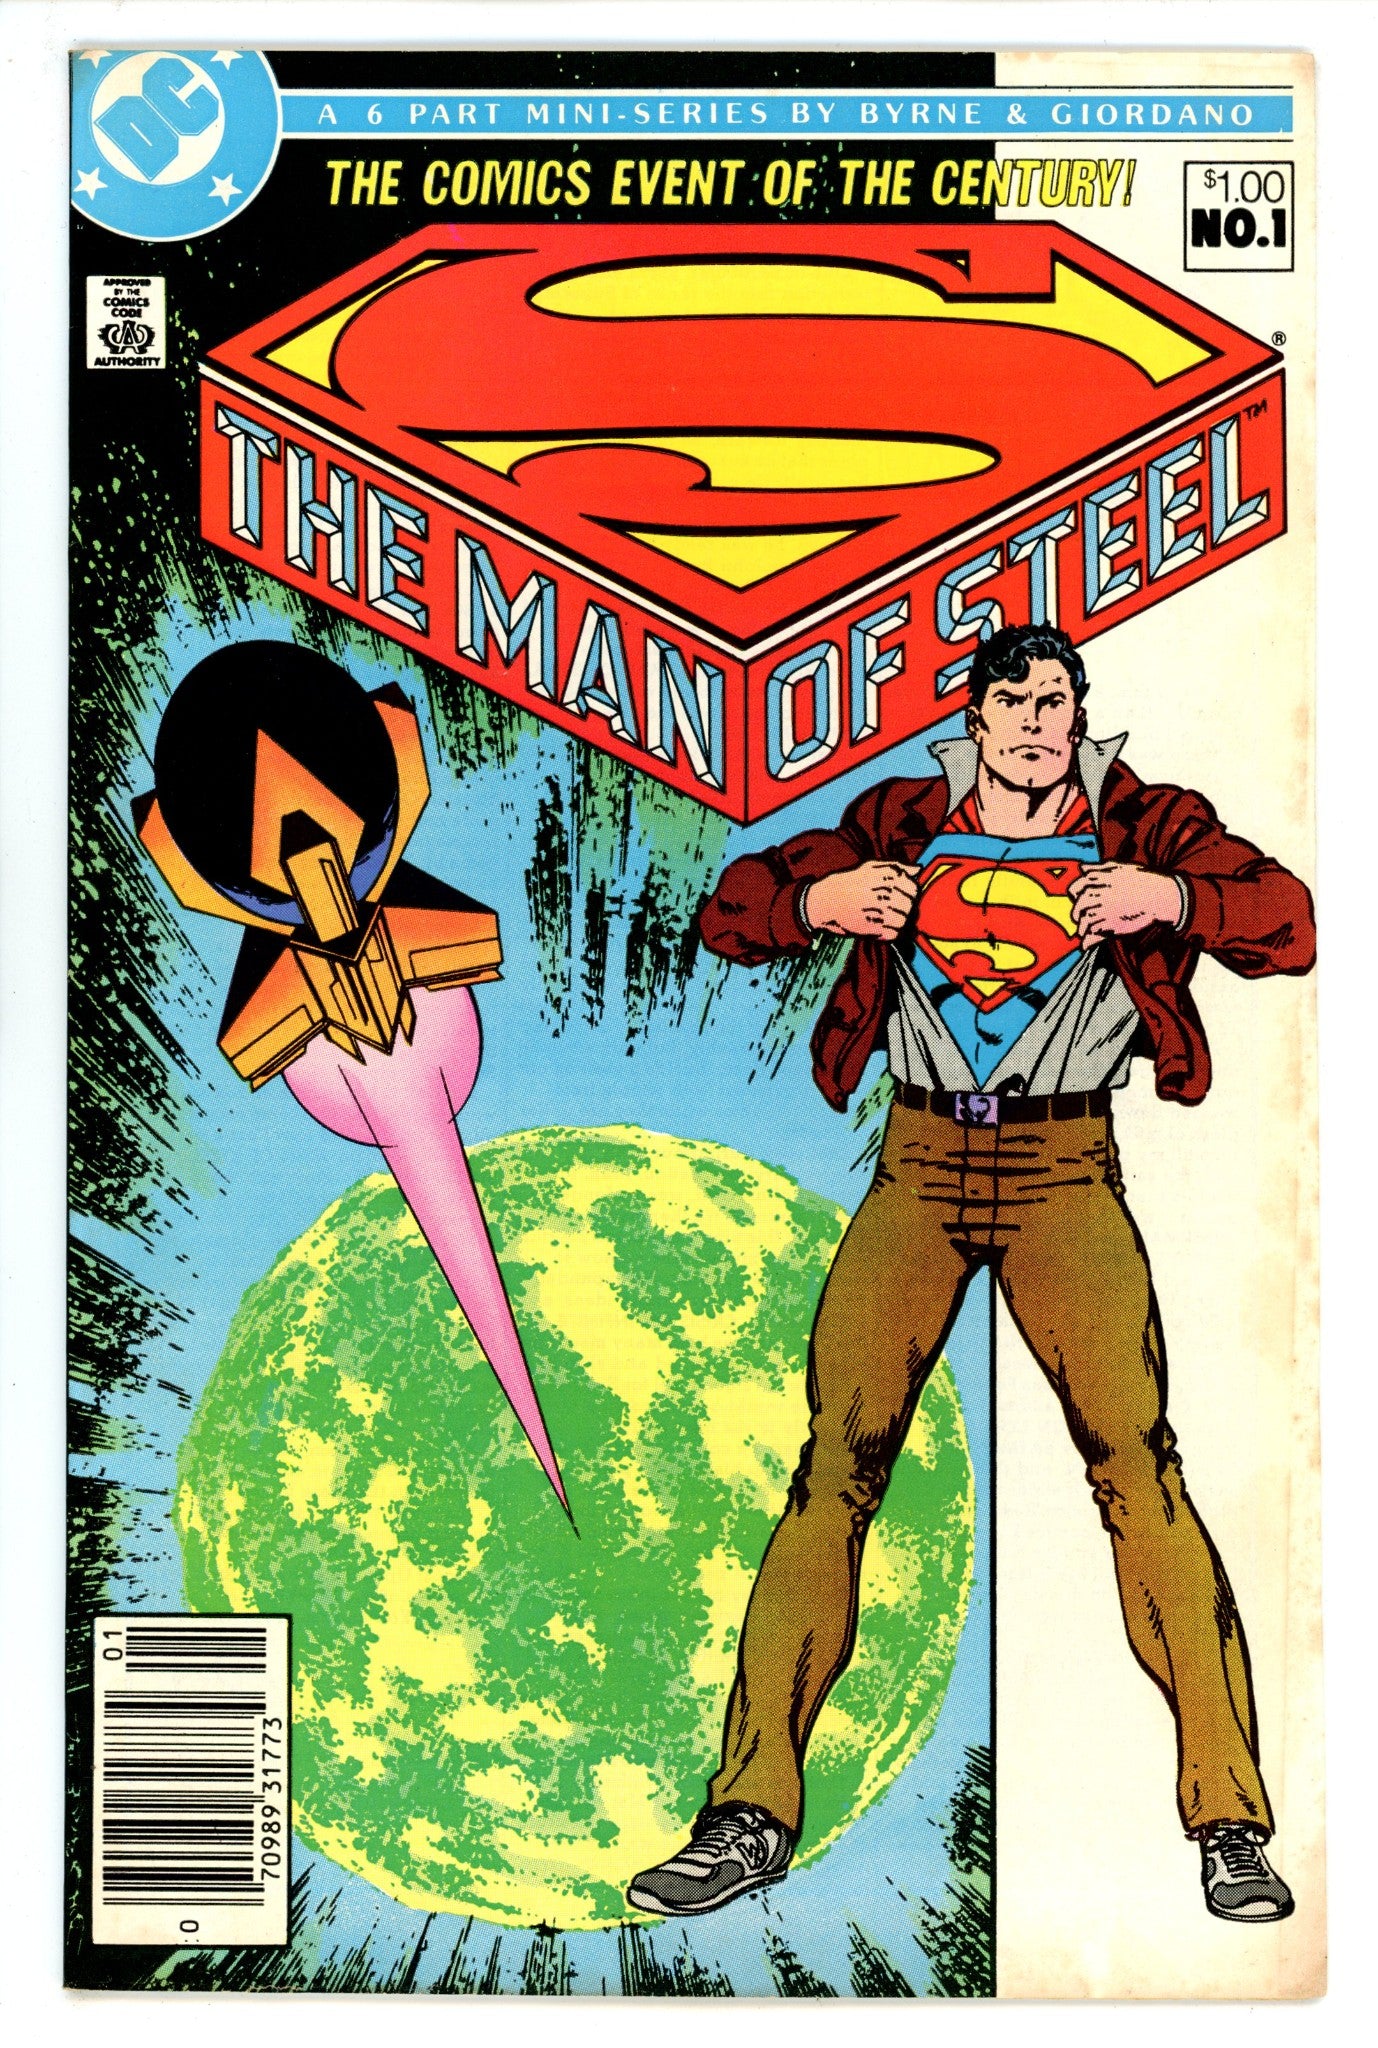 The Man of Steel Vol 1 1 FN- (5.5) (1986) Canadian Price Variant 